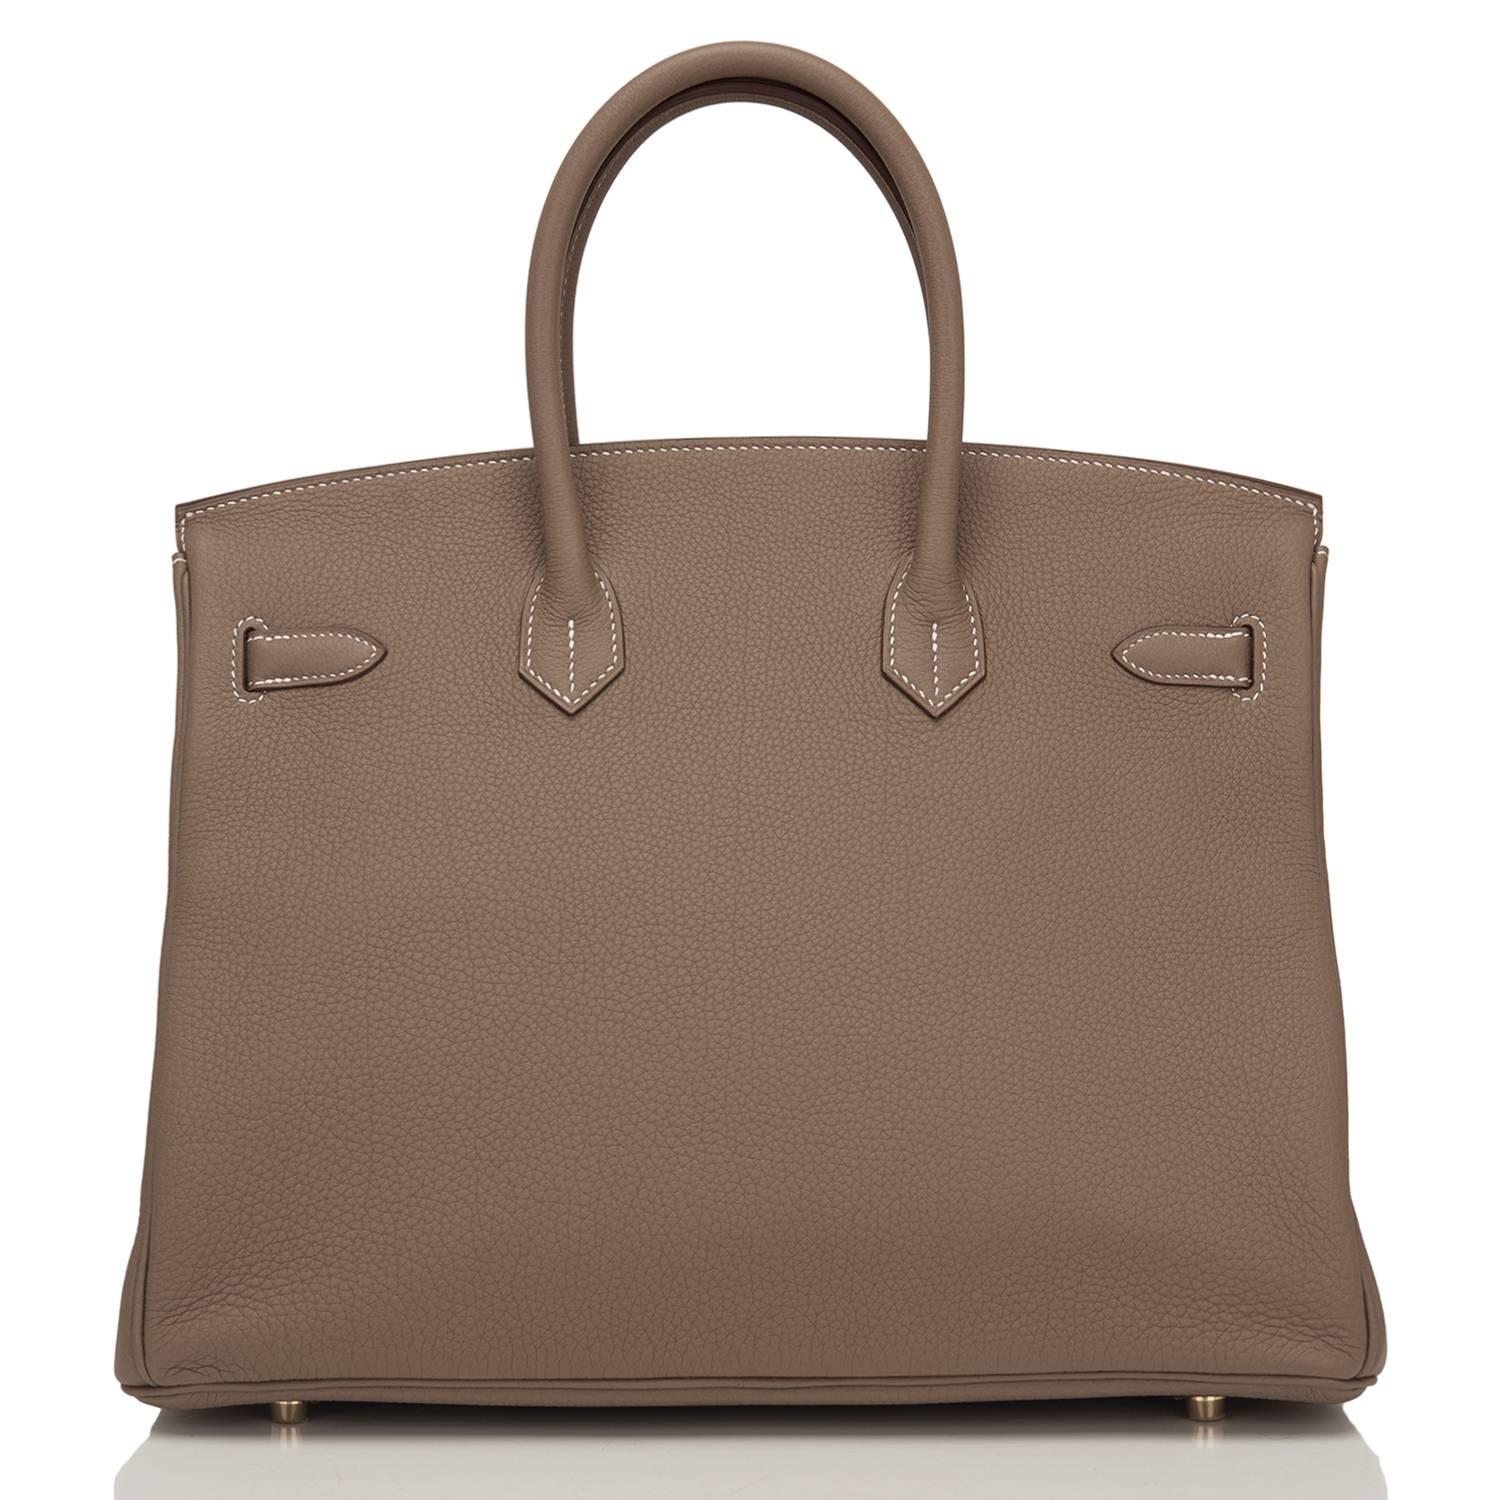 Hermes Etoupe Togo Leather 35cm Gold Hardware Birkin Bag In New Condition For Sale In New York, NY